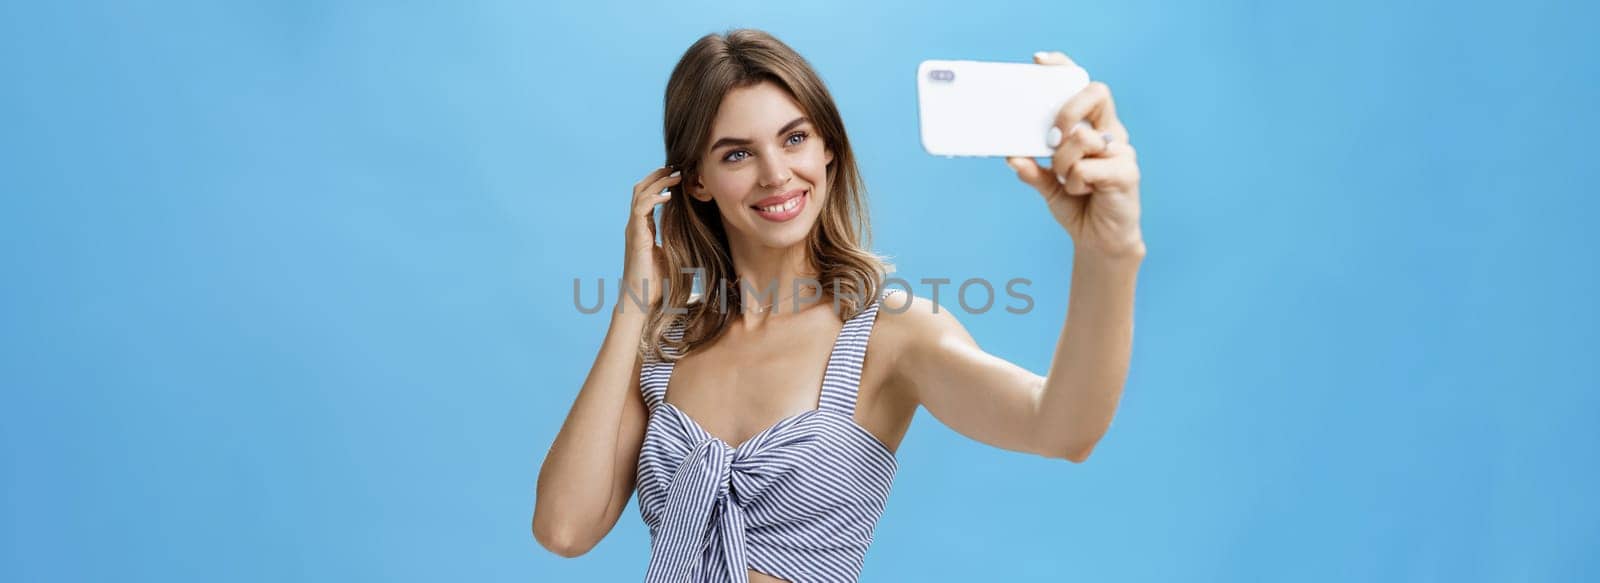 Attractive woman with good self-esteem in stylish matching outfit flicking hair behind ear smiling joyfully at smartphone screen, taking selfie to post in internet and gain followers over blue wall. Lifestyle concept